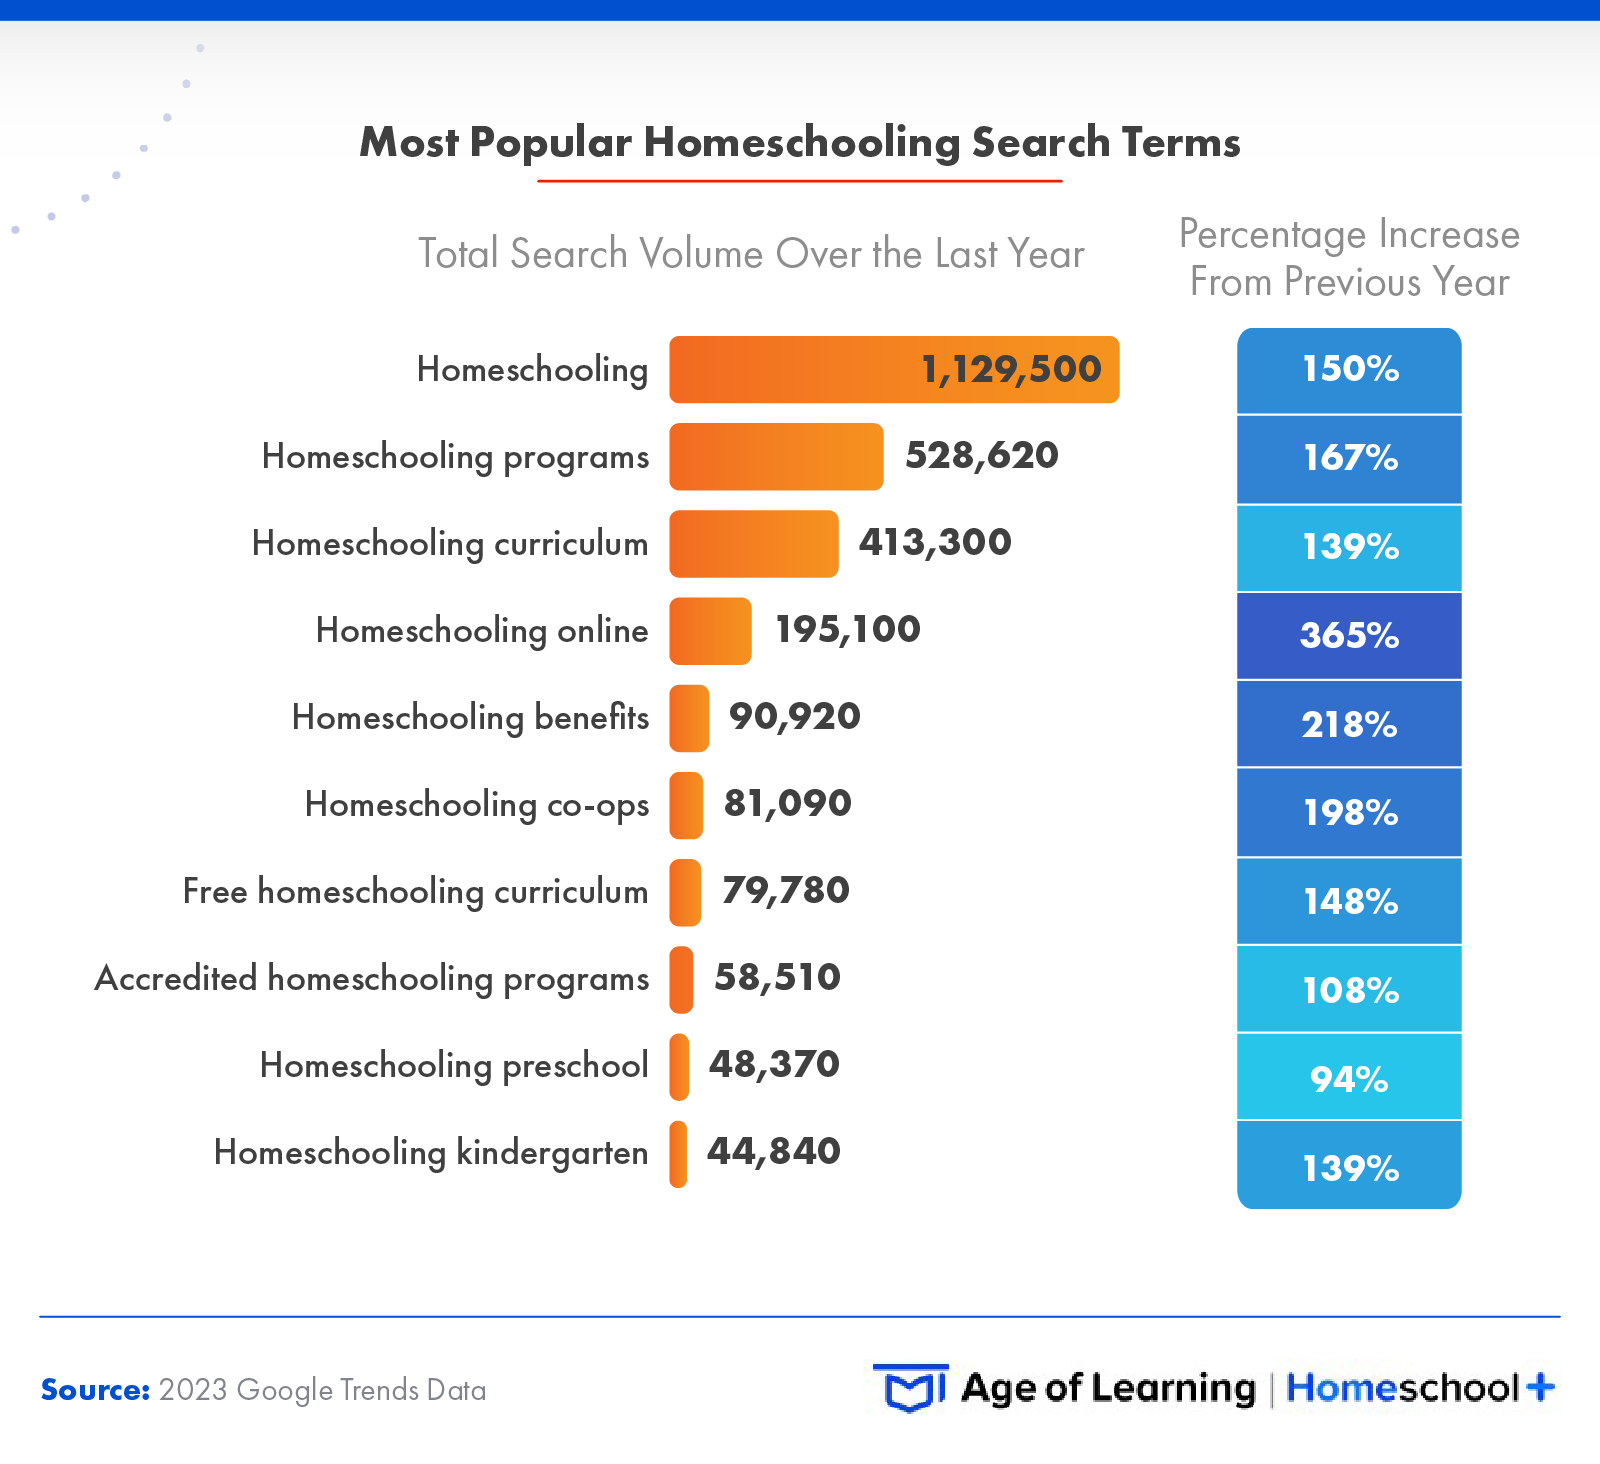 This infographic explores the most popular homeschooling search terms.